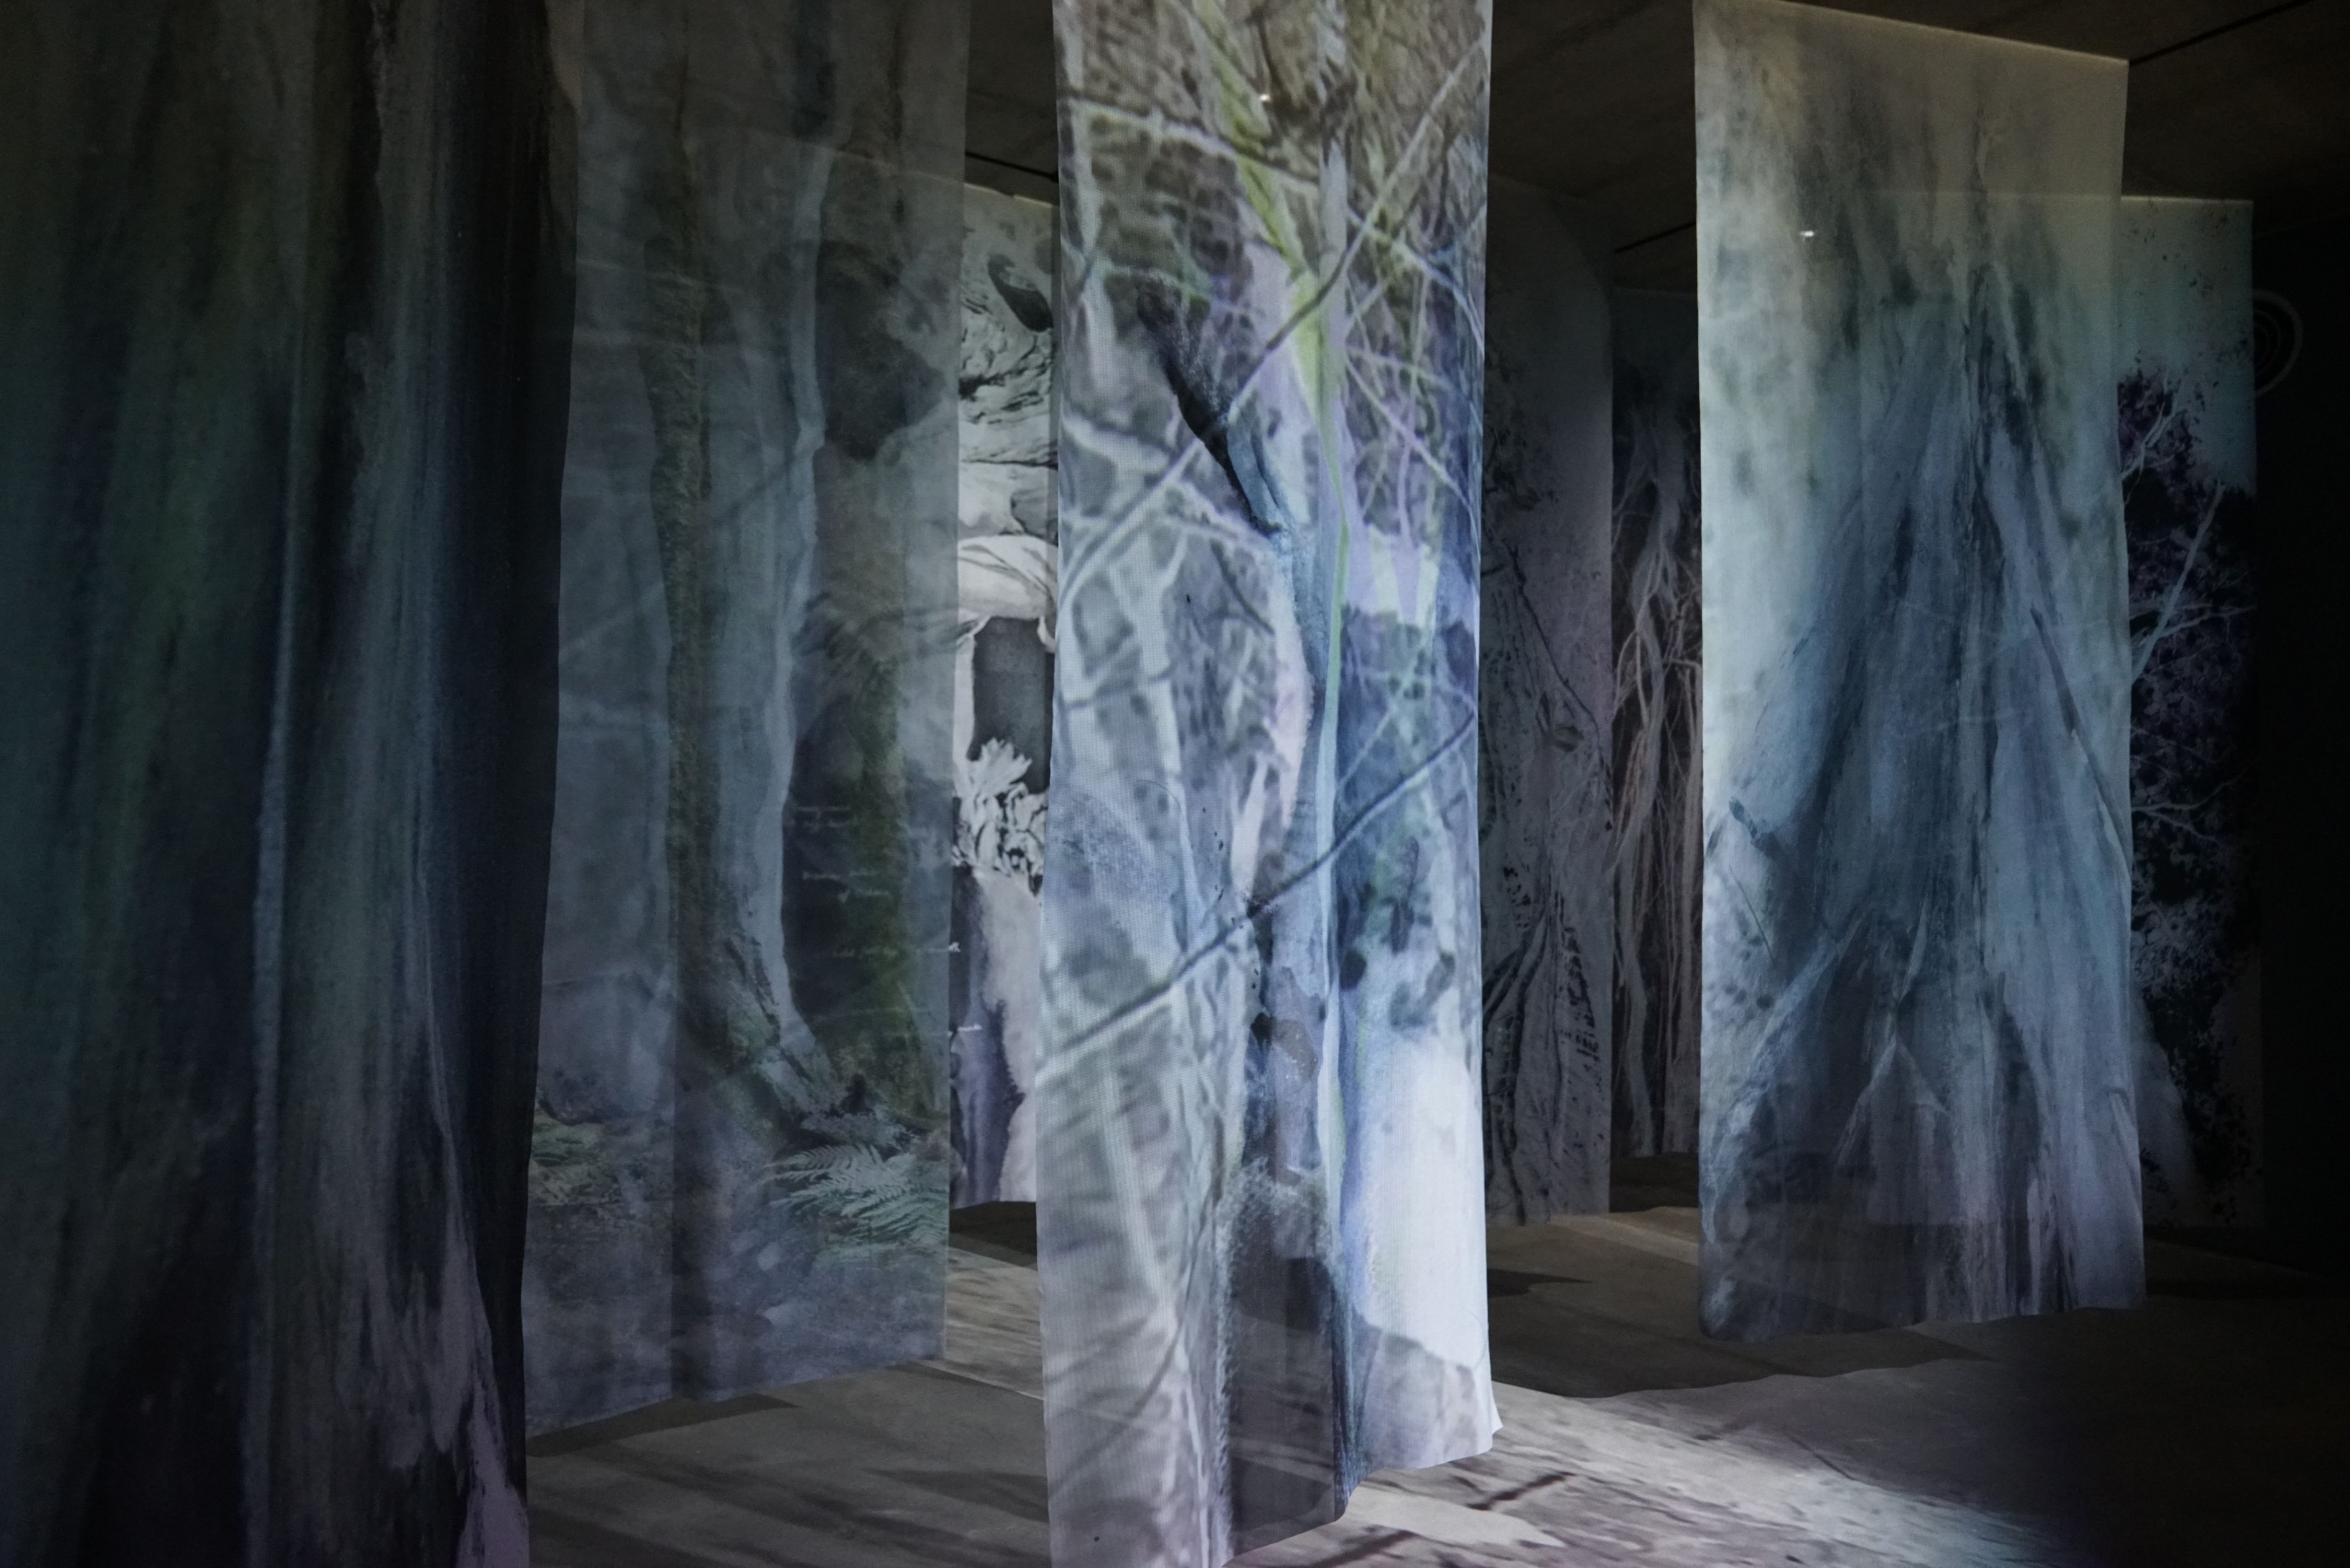 In the Breath of the Forest│Silk veil fabric curtain, video projection│360 x 145 cm 12 pieces│2020